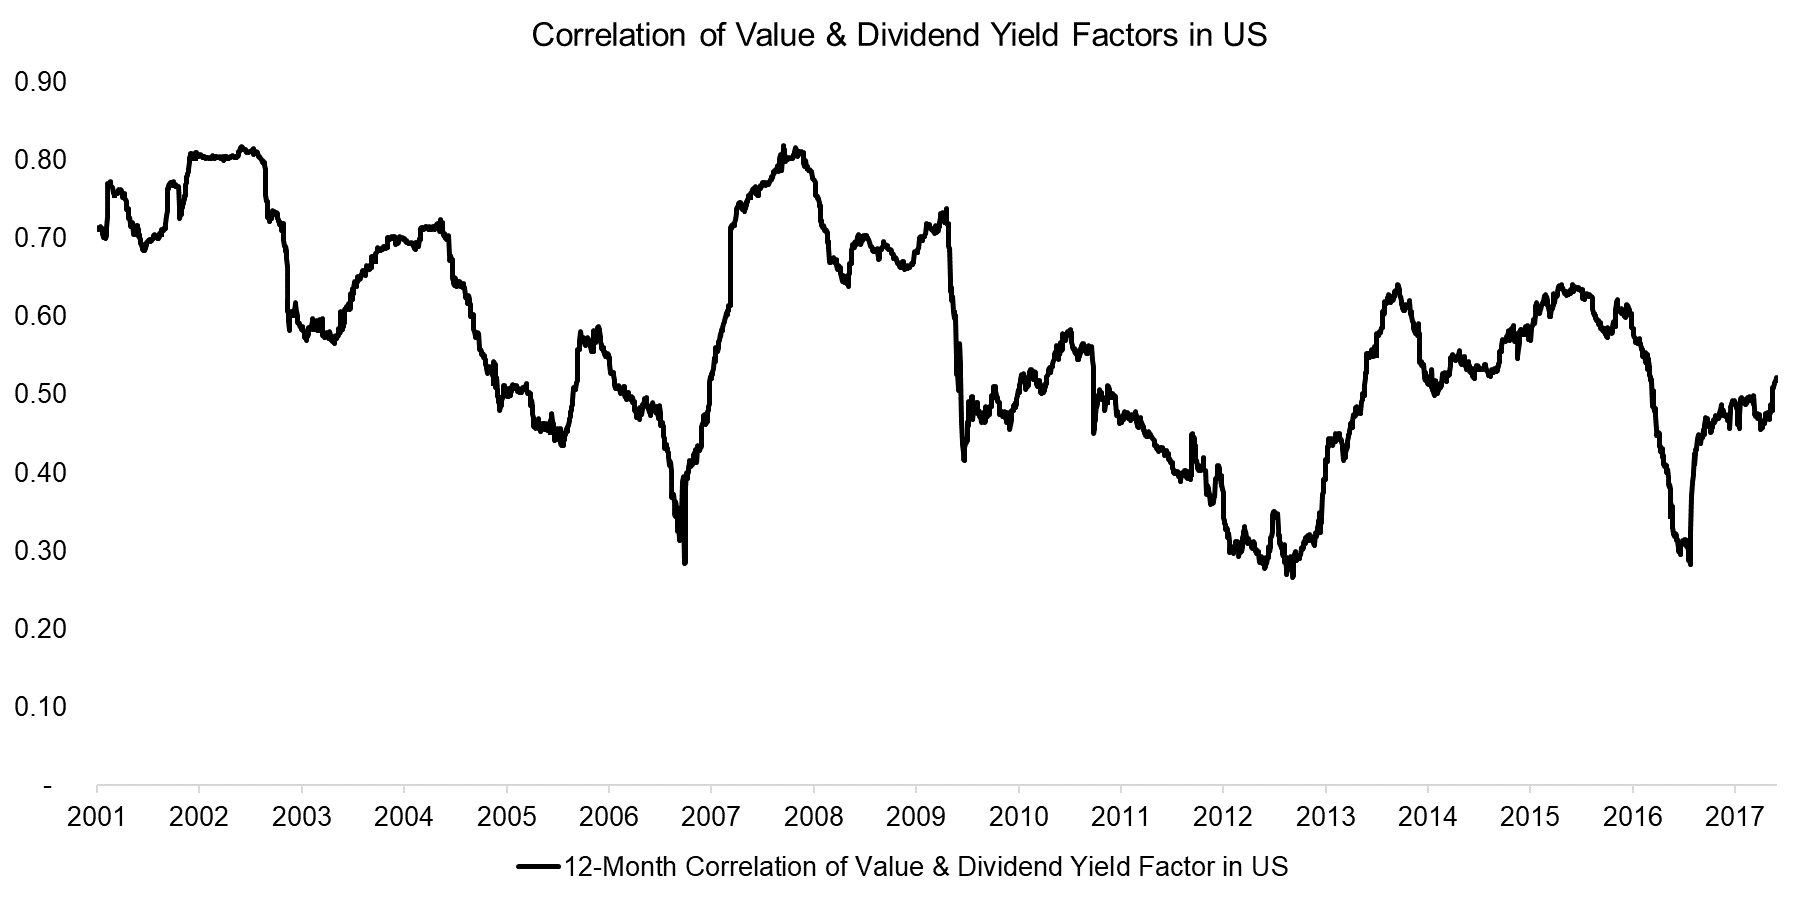 Correlation of Value & Dividend Yield Factors in US